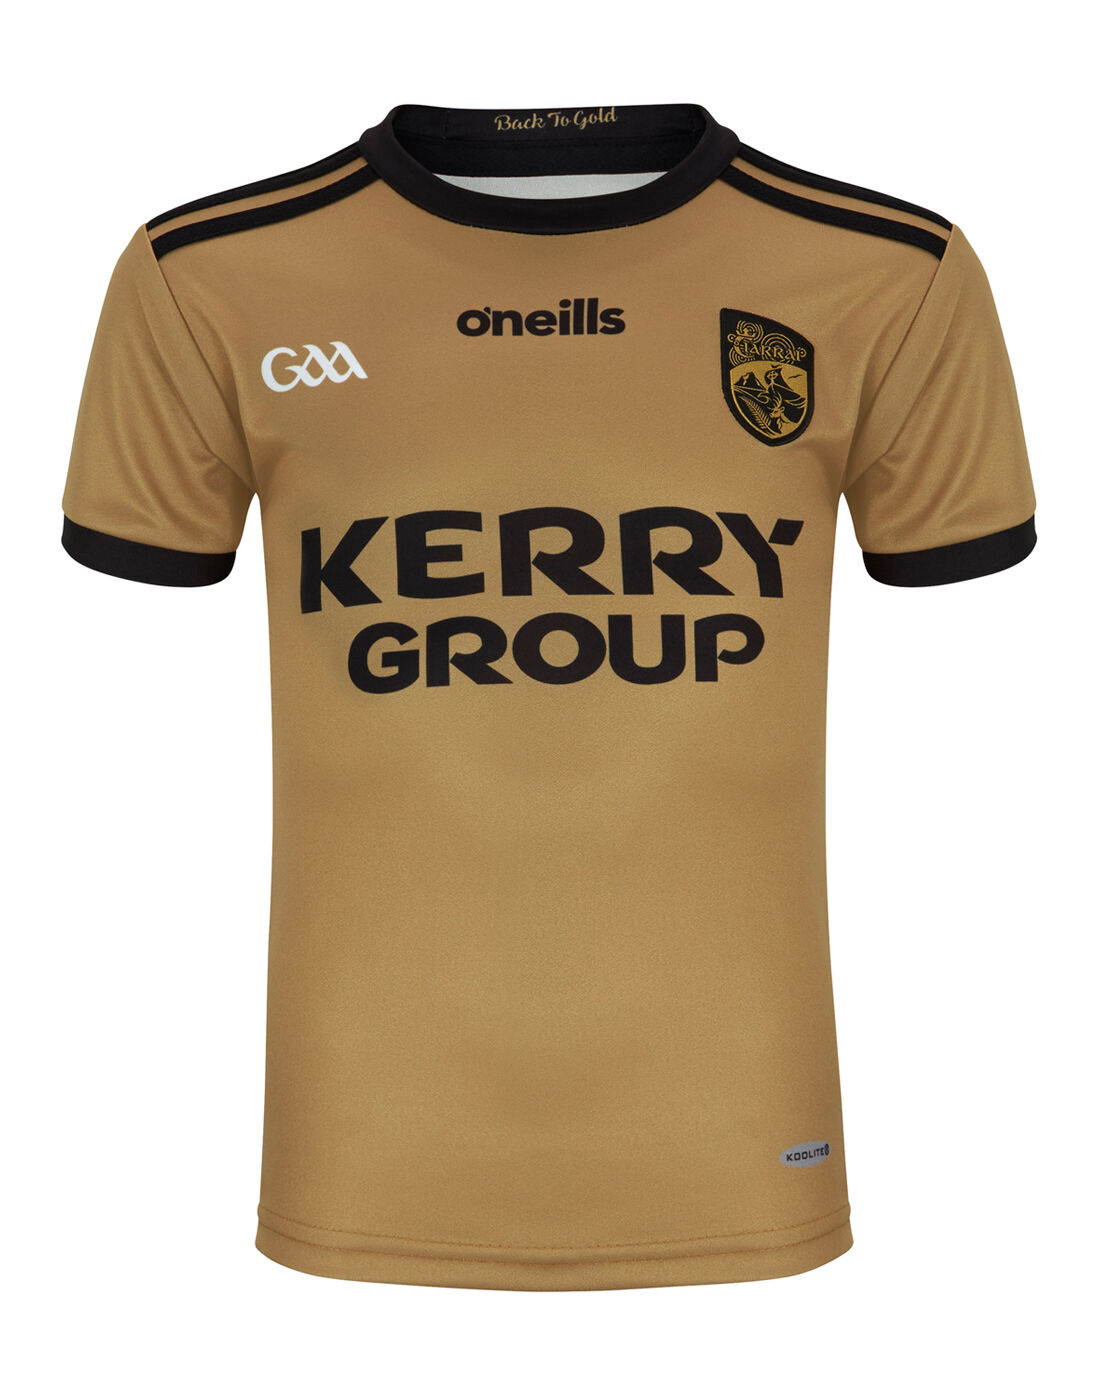 new kerry jersey 2019